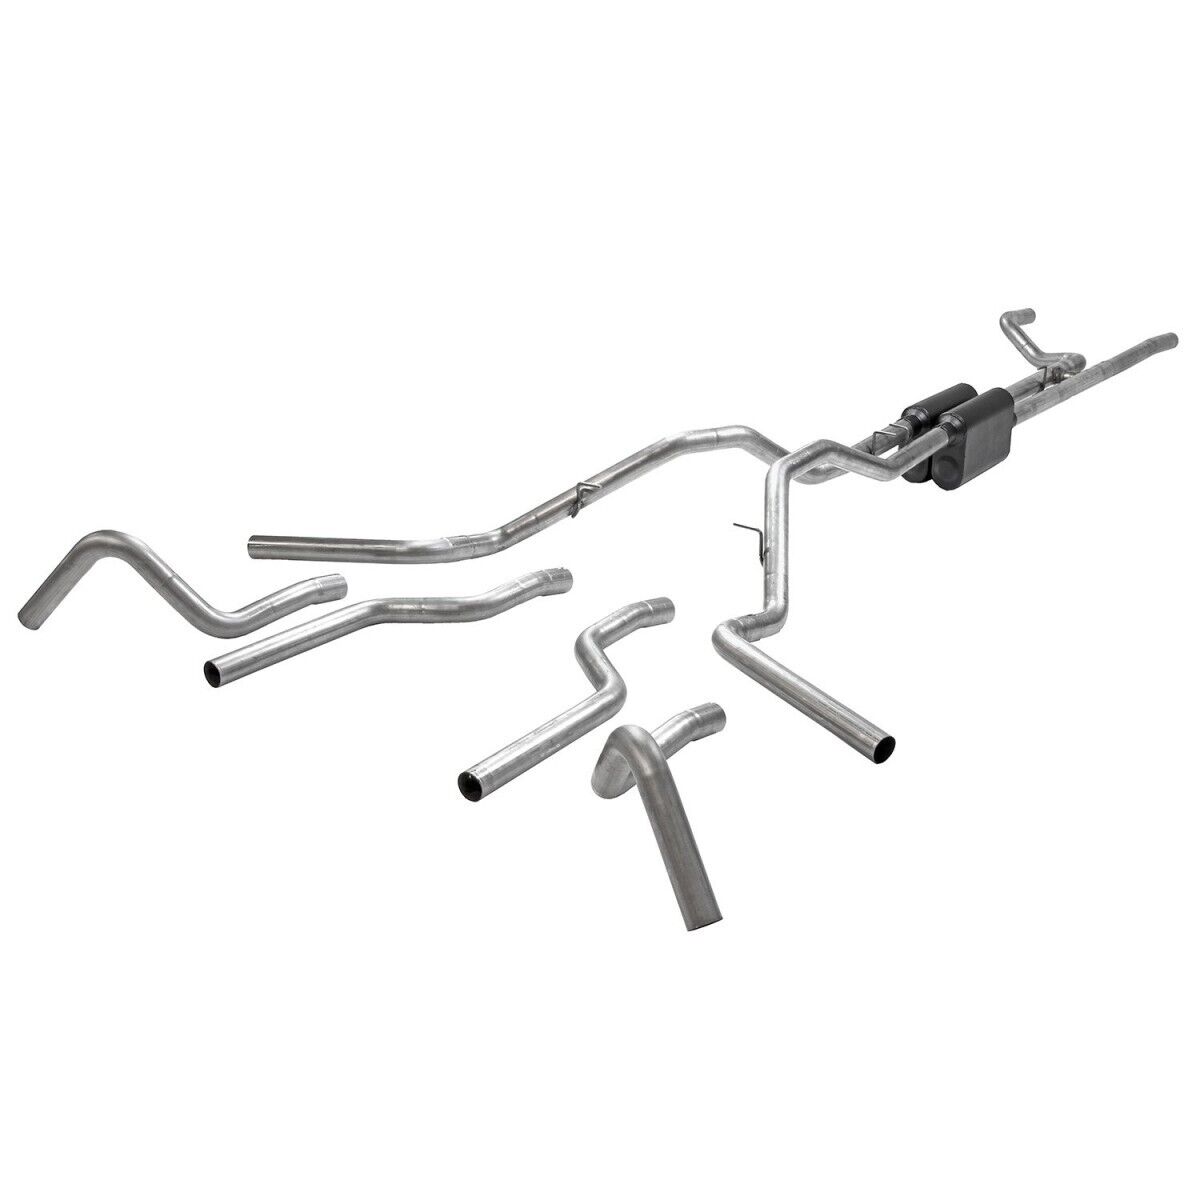 817934 Flowmaster Exhaust System for Truck F250 F350 Ford F-250 F-350 F-100